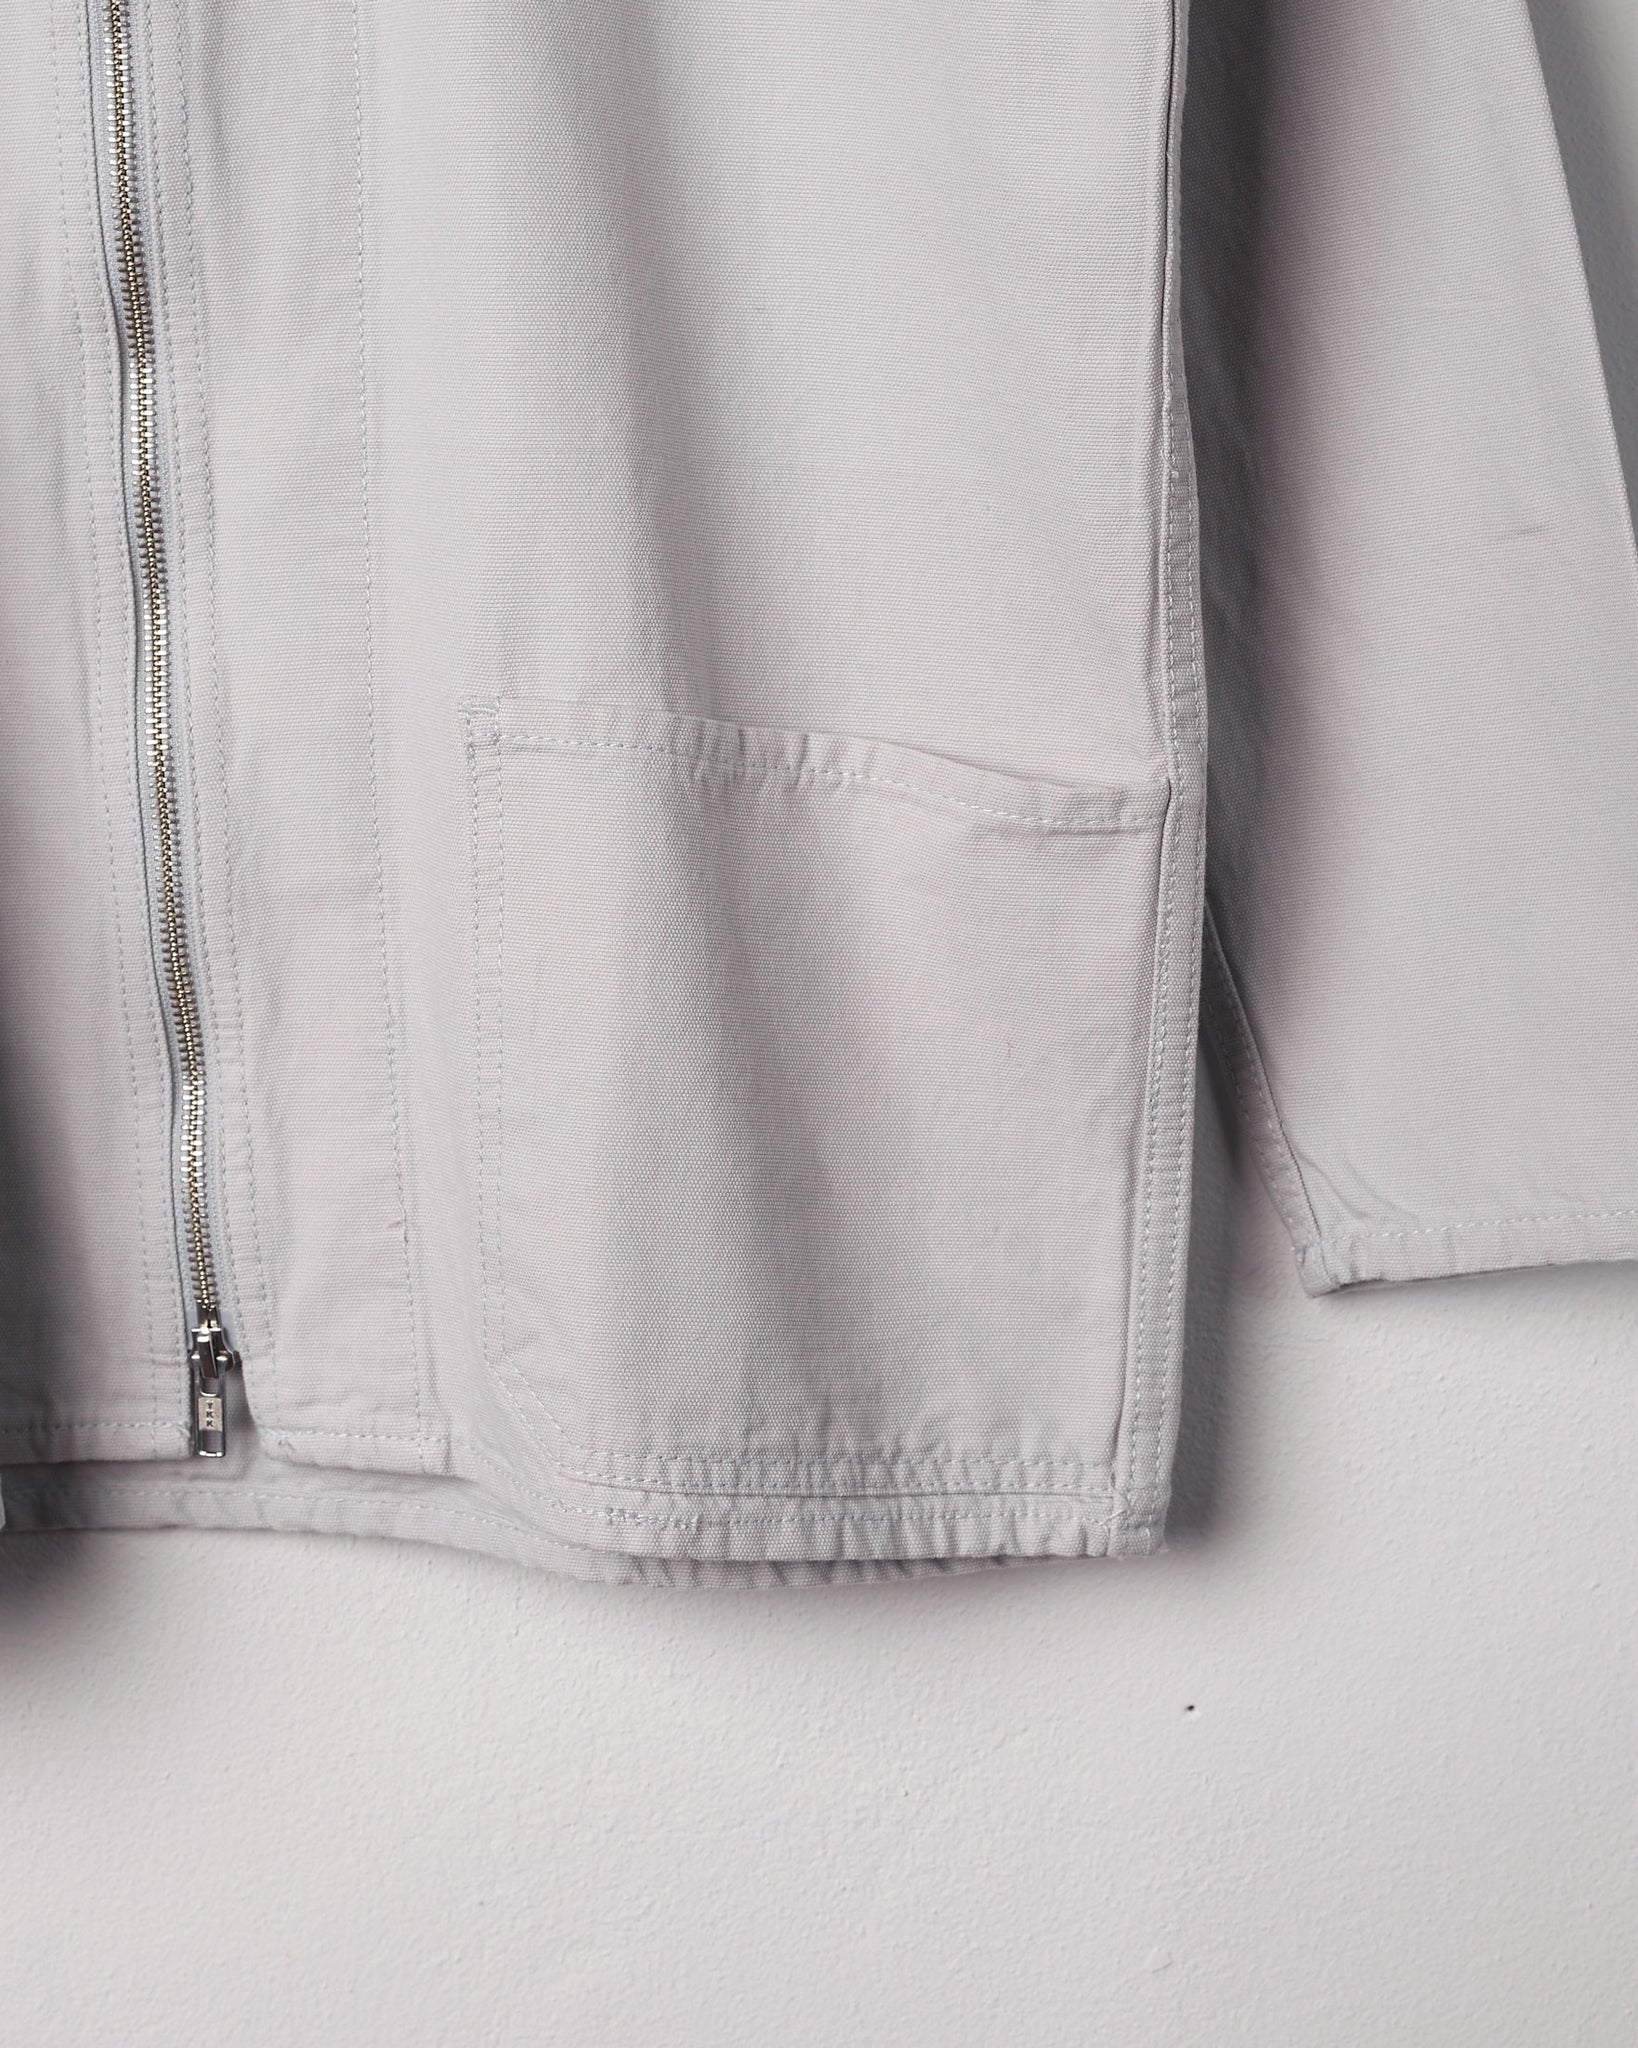 Close-up of organic cotton, #3002 light-grey zip jacket focussing on the hip pocket.